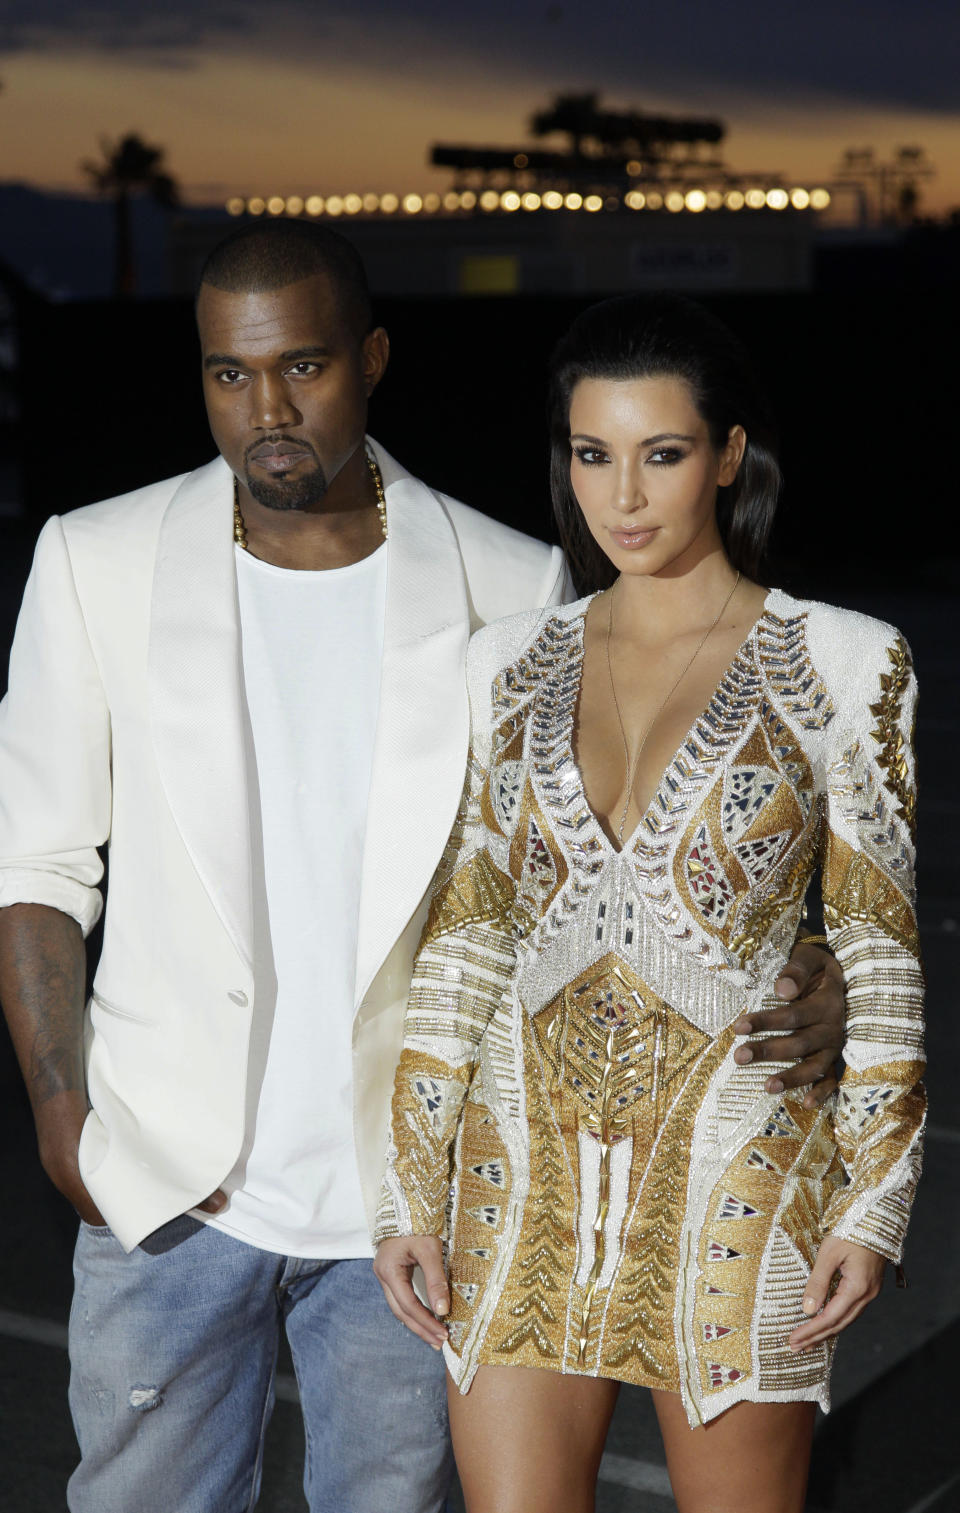 FILE - In this May 23, 2012 file photo, singer Kanye West, left, and television personality Kim Kardashian arrive for the screening of "Cruel Summer" at the 65th international film festival, in Cannes, southern France. West had many righteous things to rage about this year, from the fashion industry not giving him credit for brilliant, life-changing designs like leather jogging pants to not getting respect from President Barack Obama. But nothing seemed to upset him more than Vogue's apparent refusal to put his baby mama, Kardashian, on their cover. (AP Photo/Francois Mori, File)